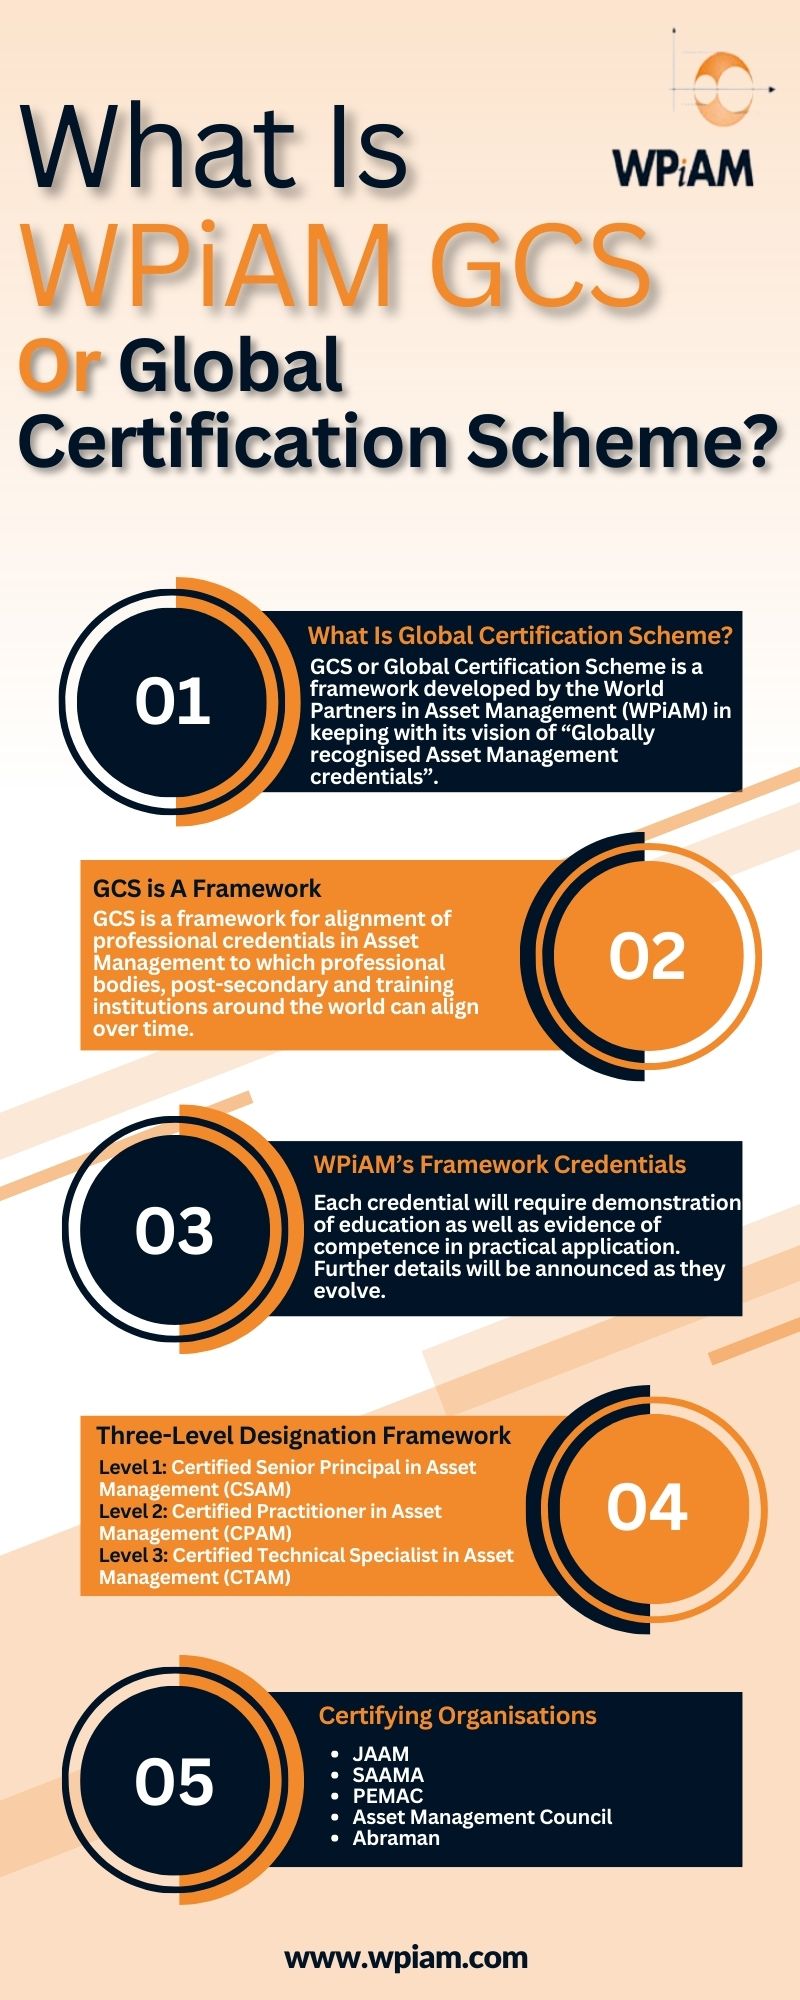 What Is WPiAM GCS Or Global Certification Scheme?